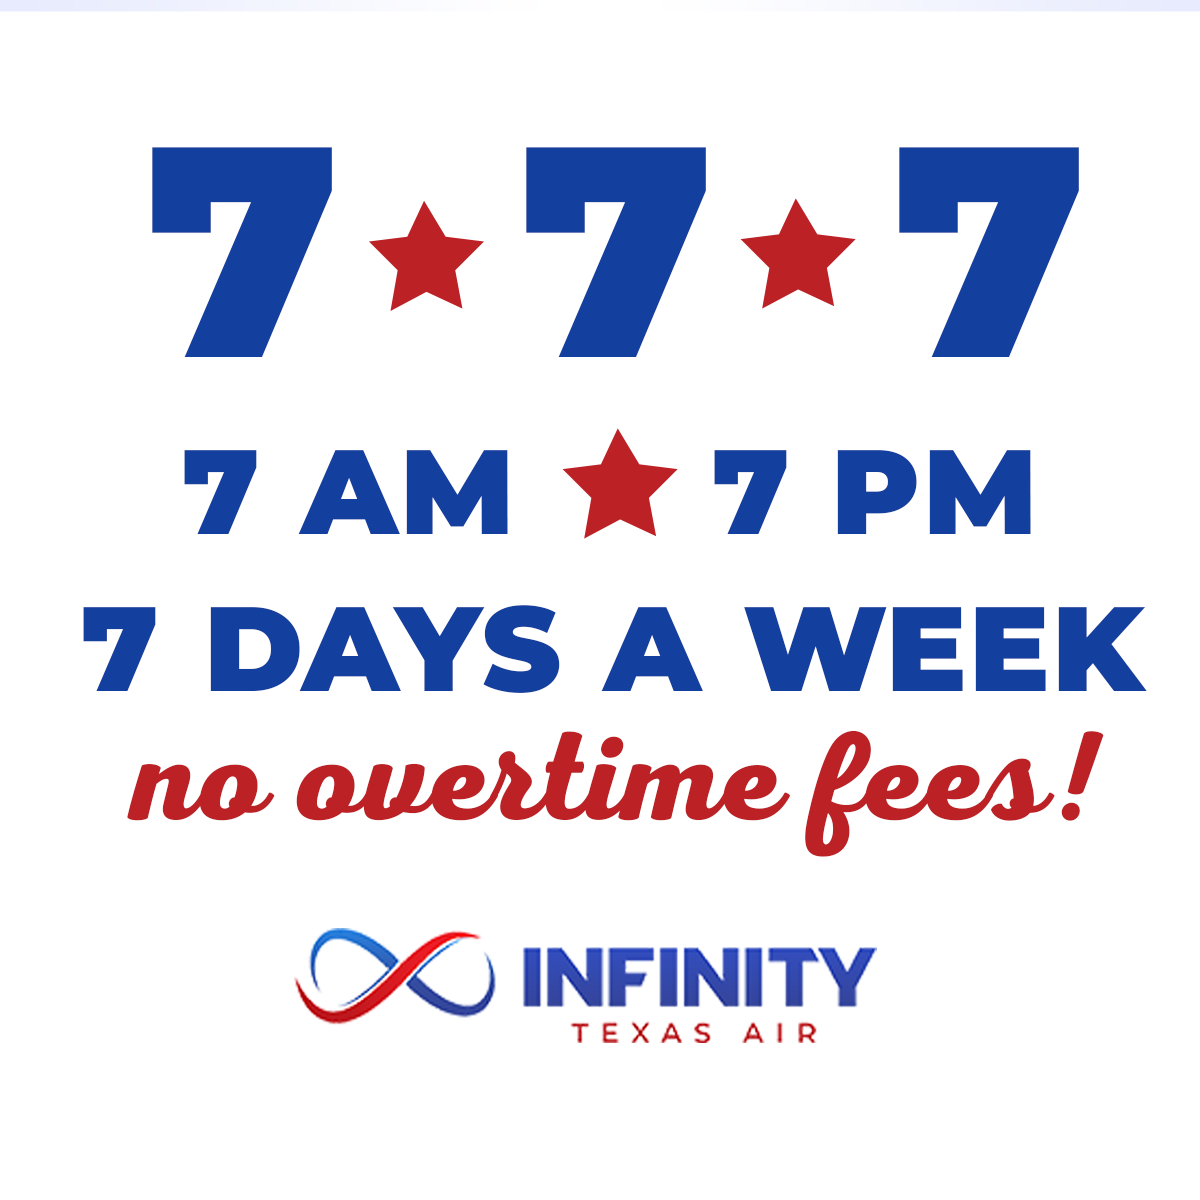 OUR SPECIALS | Infinity Texas Air